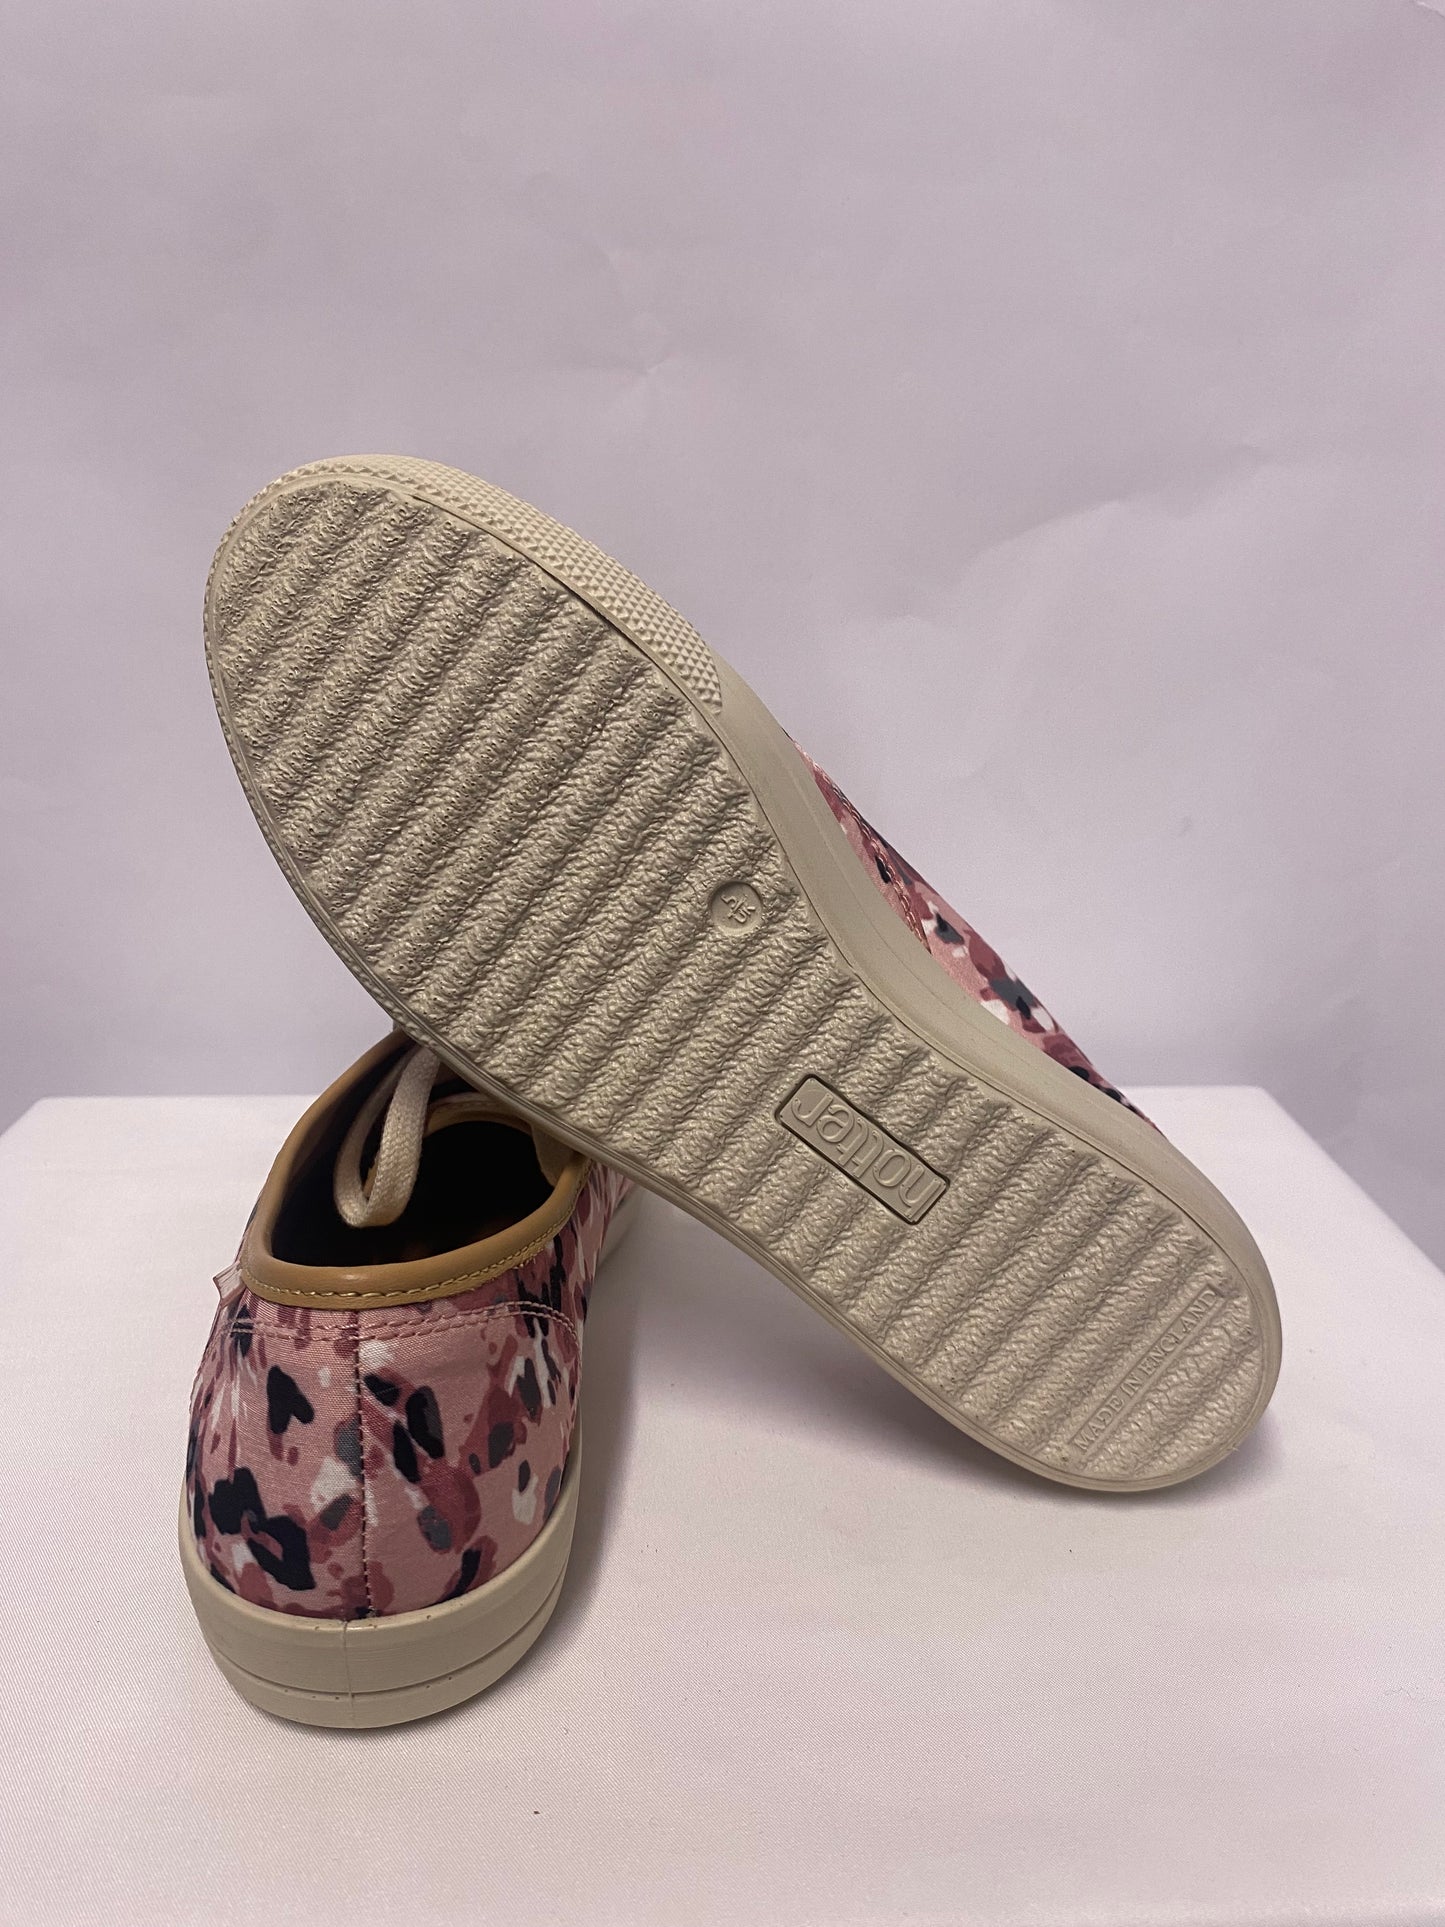 Hotter Pink Camouflage Plimsole Trainers 5